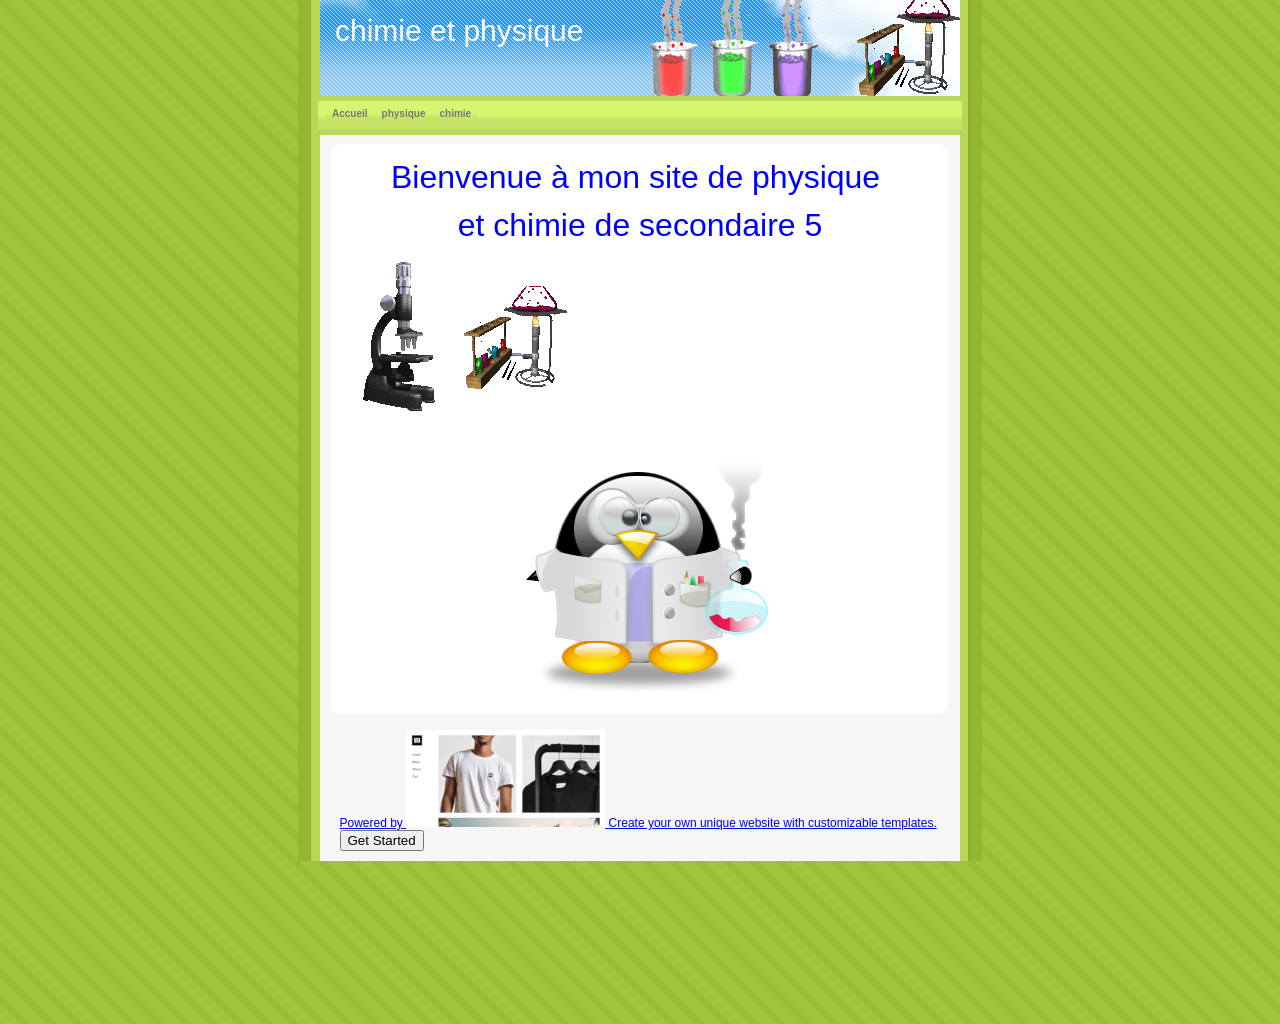 chimieetphysiquepasteur.weebly.com